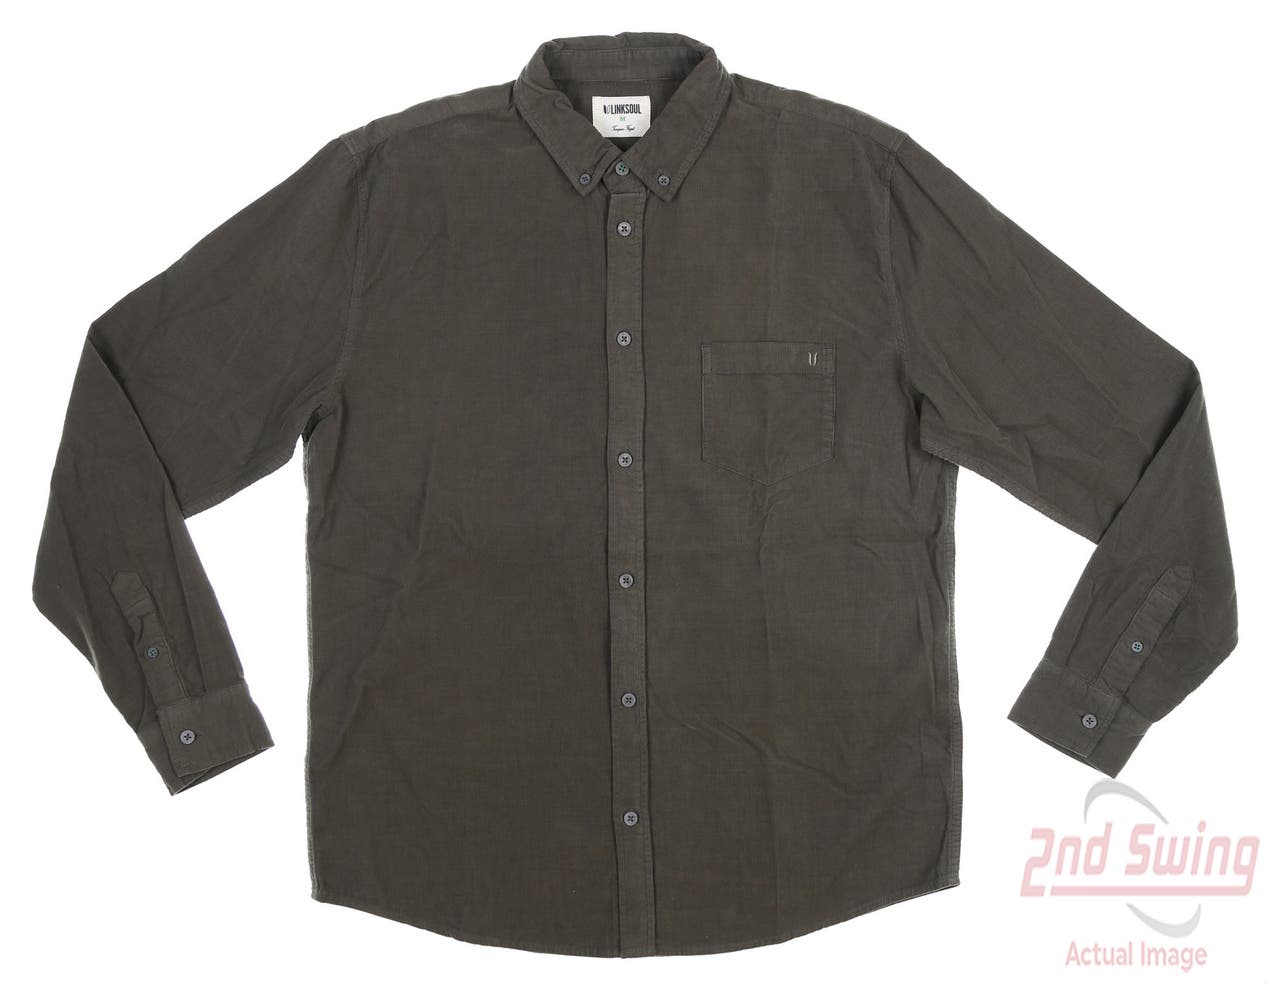 New Mens LinkSoul Pinwale Corduroy Button Up XX-Large XXL Sycamore MSRP $98